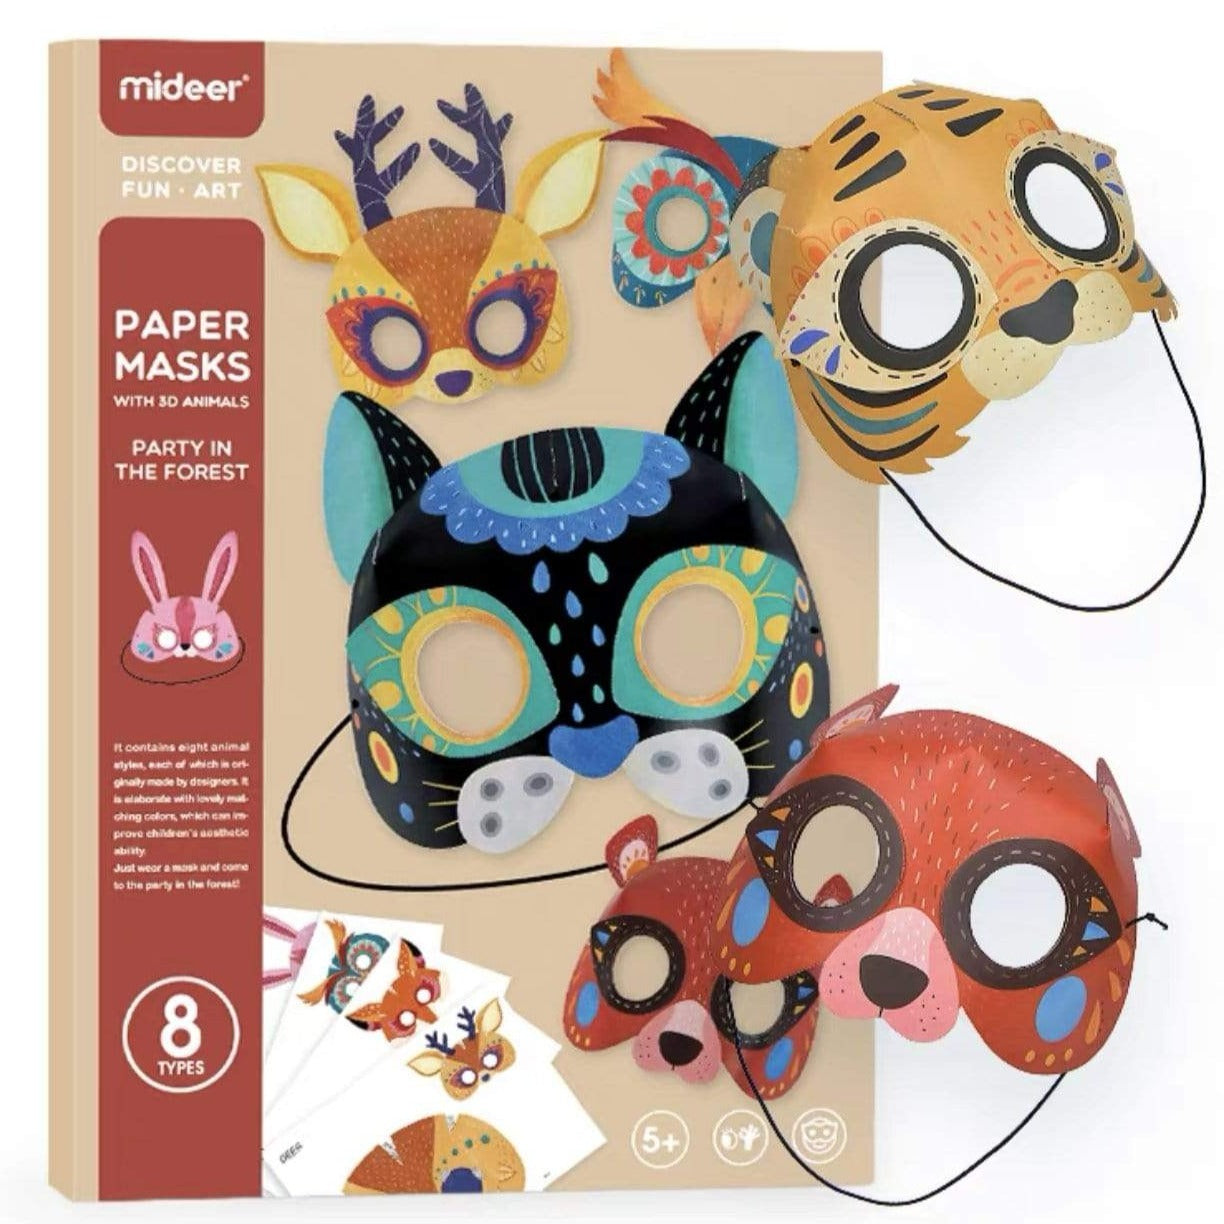 HELMS STORE Mideer Paper Masks with 3D Animals